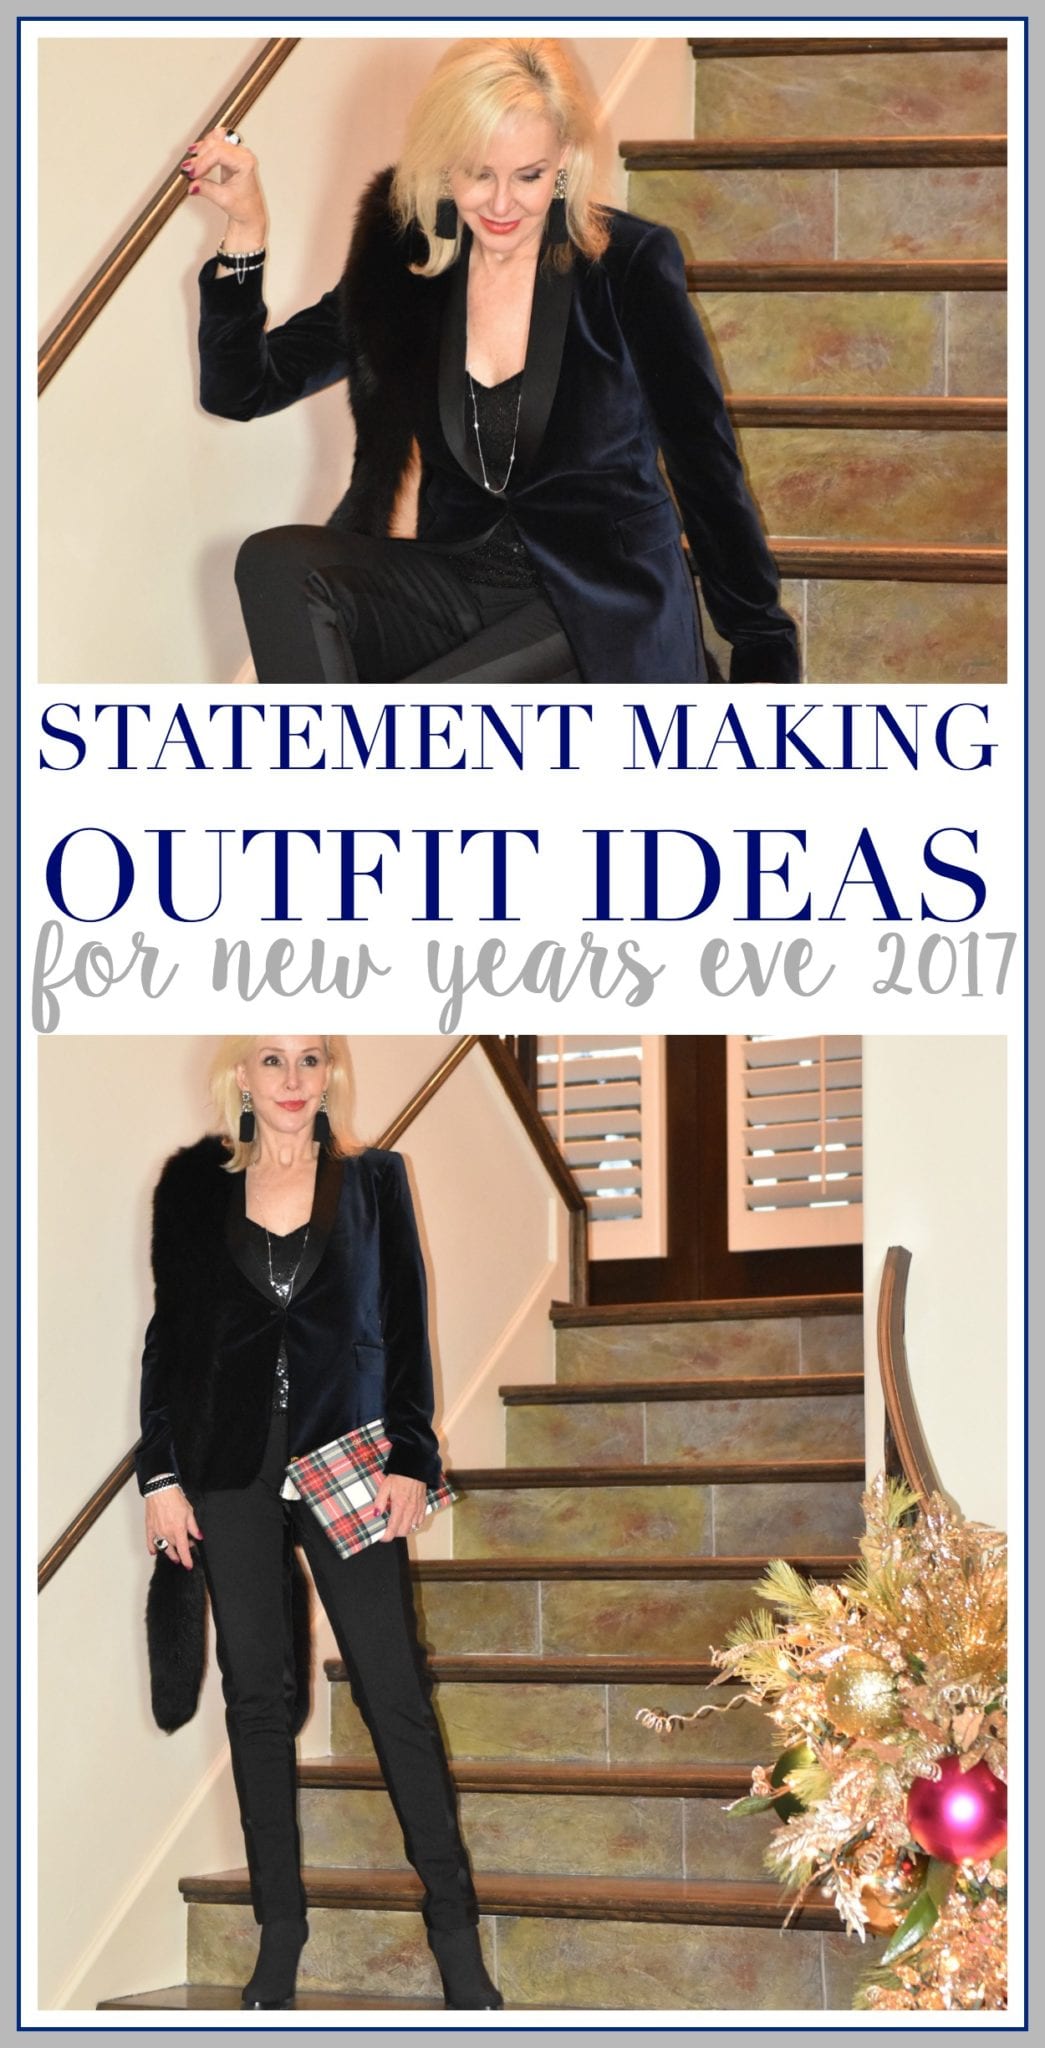 velvet, new years eve, statement, winter, outfit, 